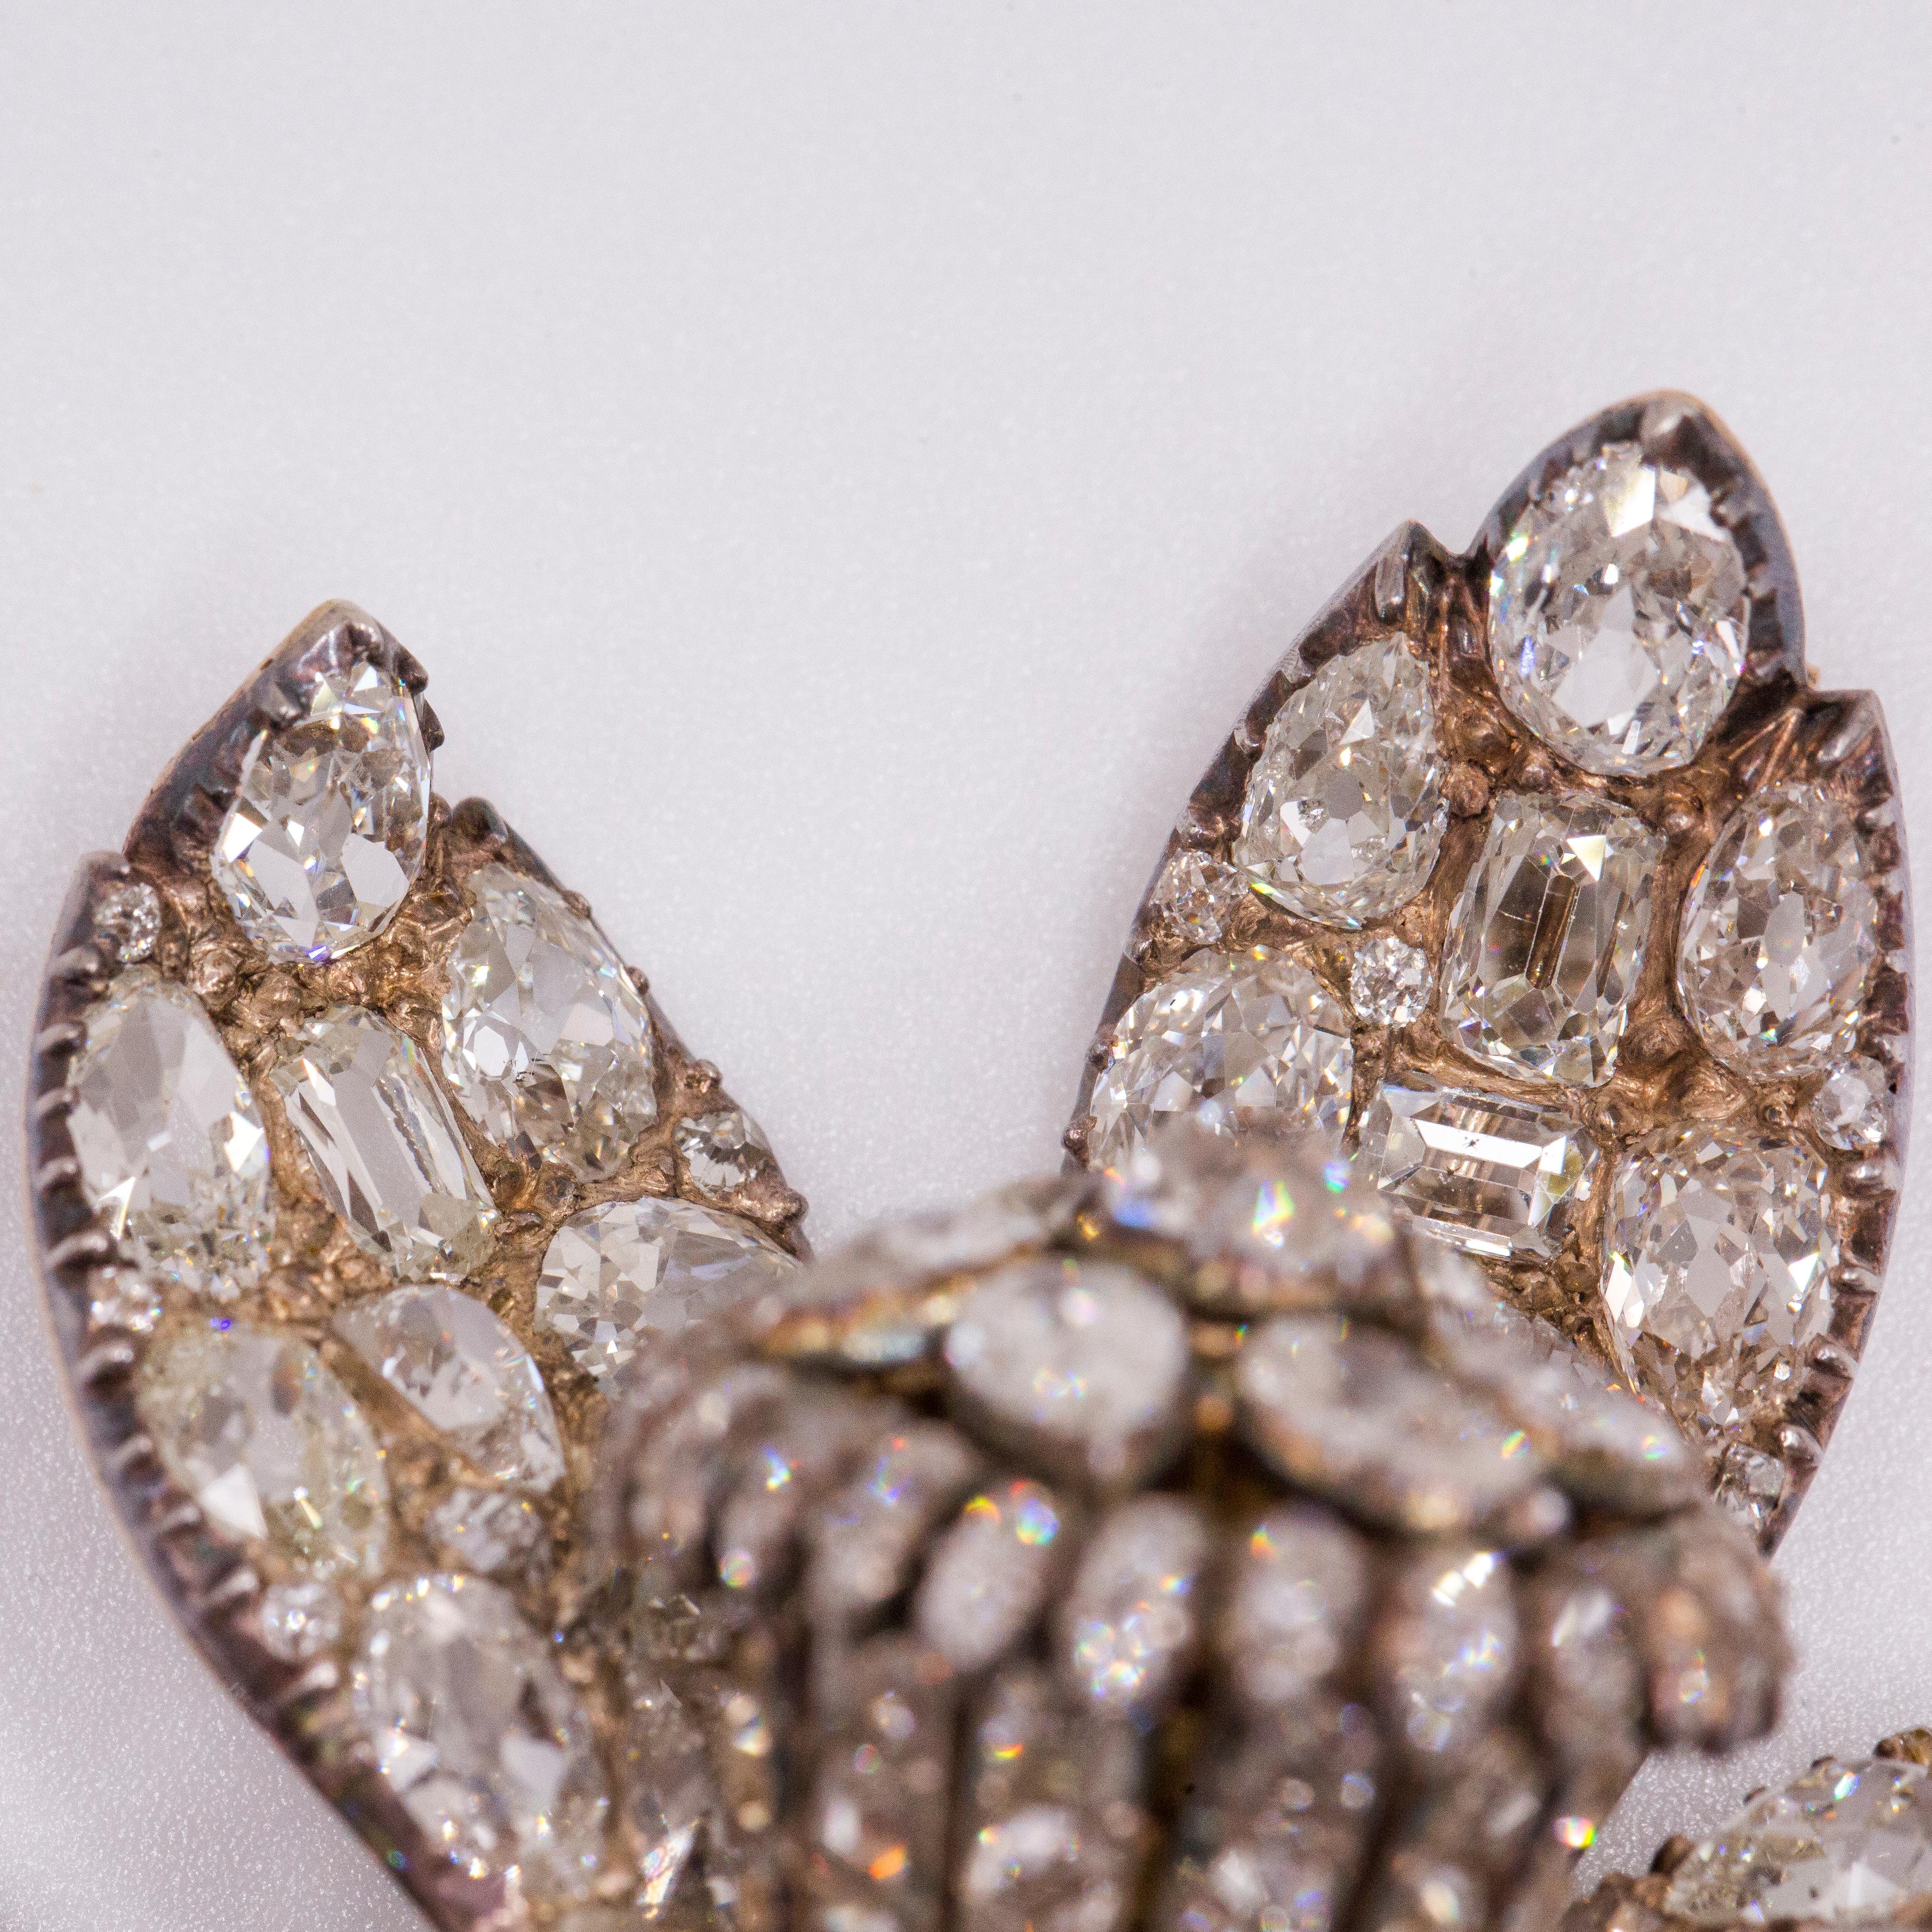 Inundating petals of precious karat gold and silver are encrusted with 324 fine, hand-cut diamonds weighing 110 carats. An exceptional jewel and object d'art of, the brooch became a piece of Americana when acquired by Anna Dilman Dodge in about